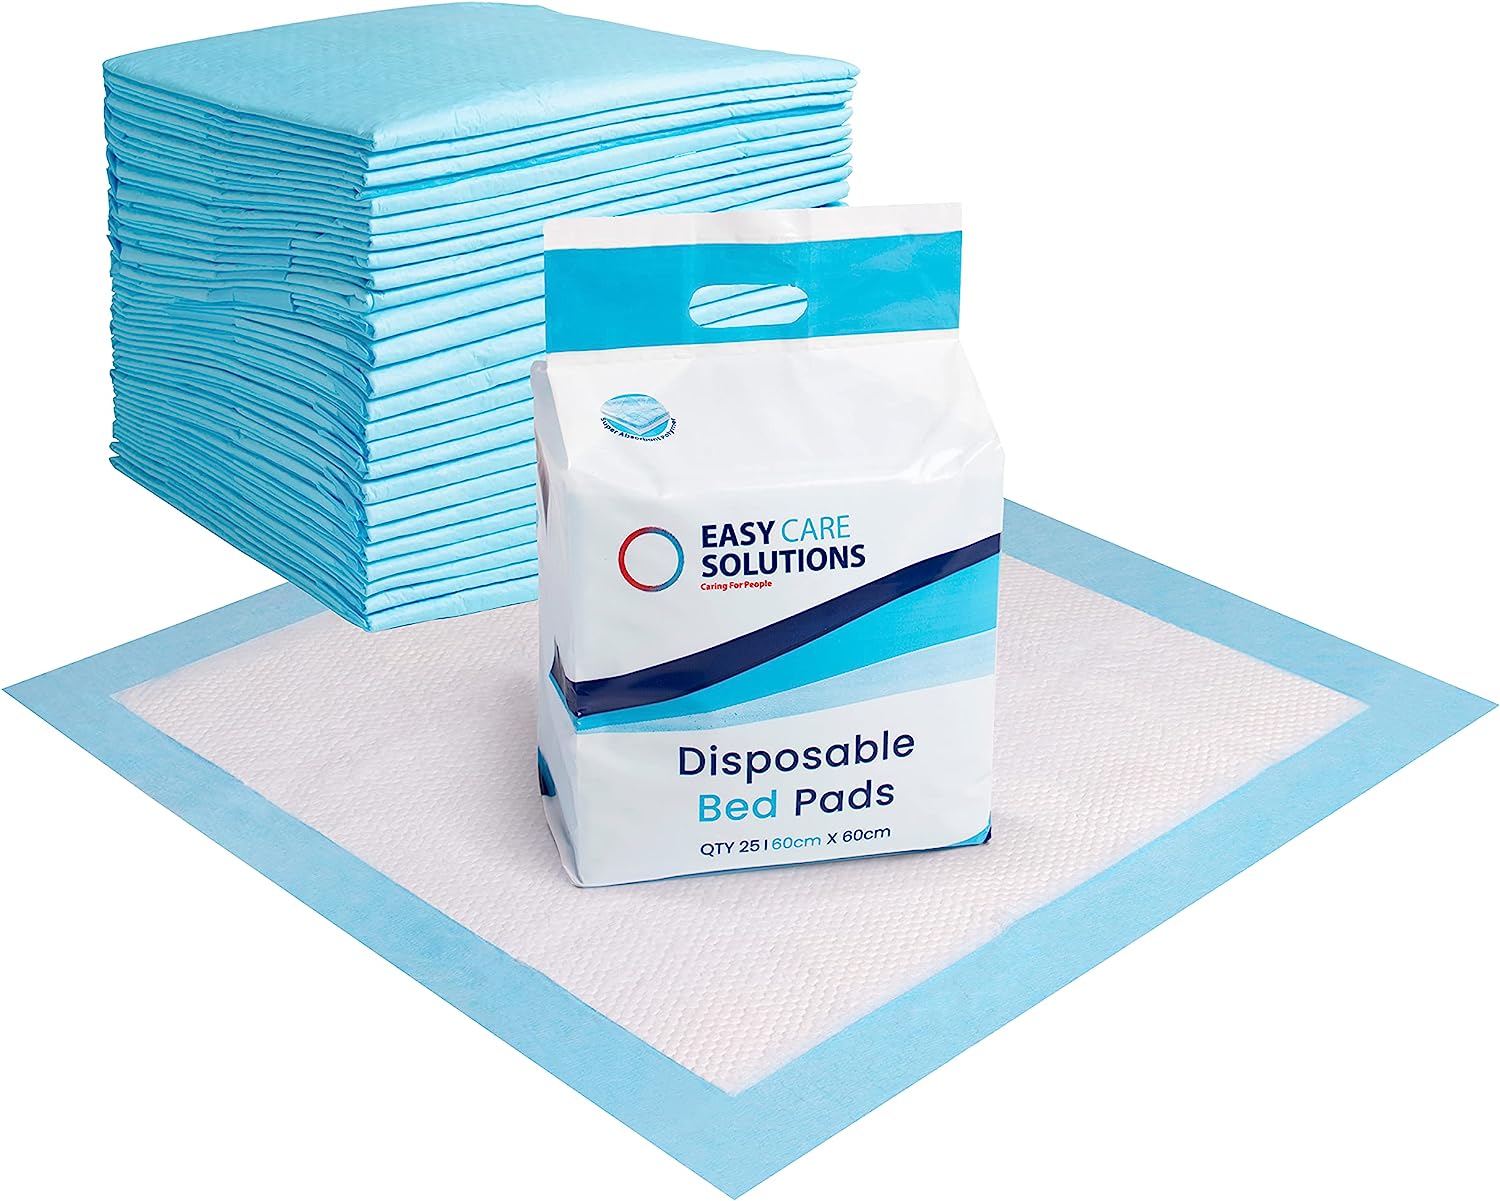 Easy Care Solutions Disposable Incontinence Bed Pads 60 x 60 cm Pack of 25 RRP £5.99 CLEARANCE XL £4.99